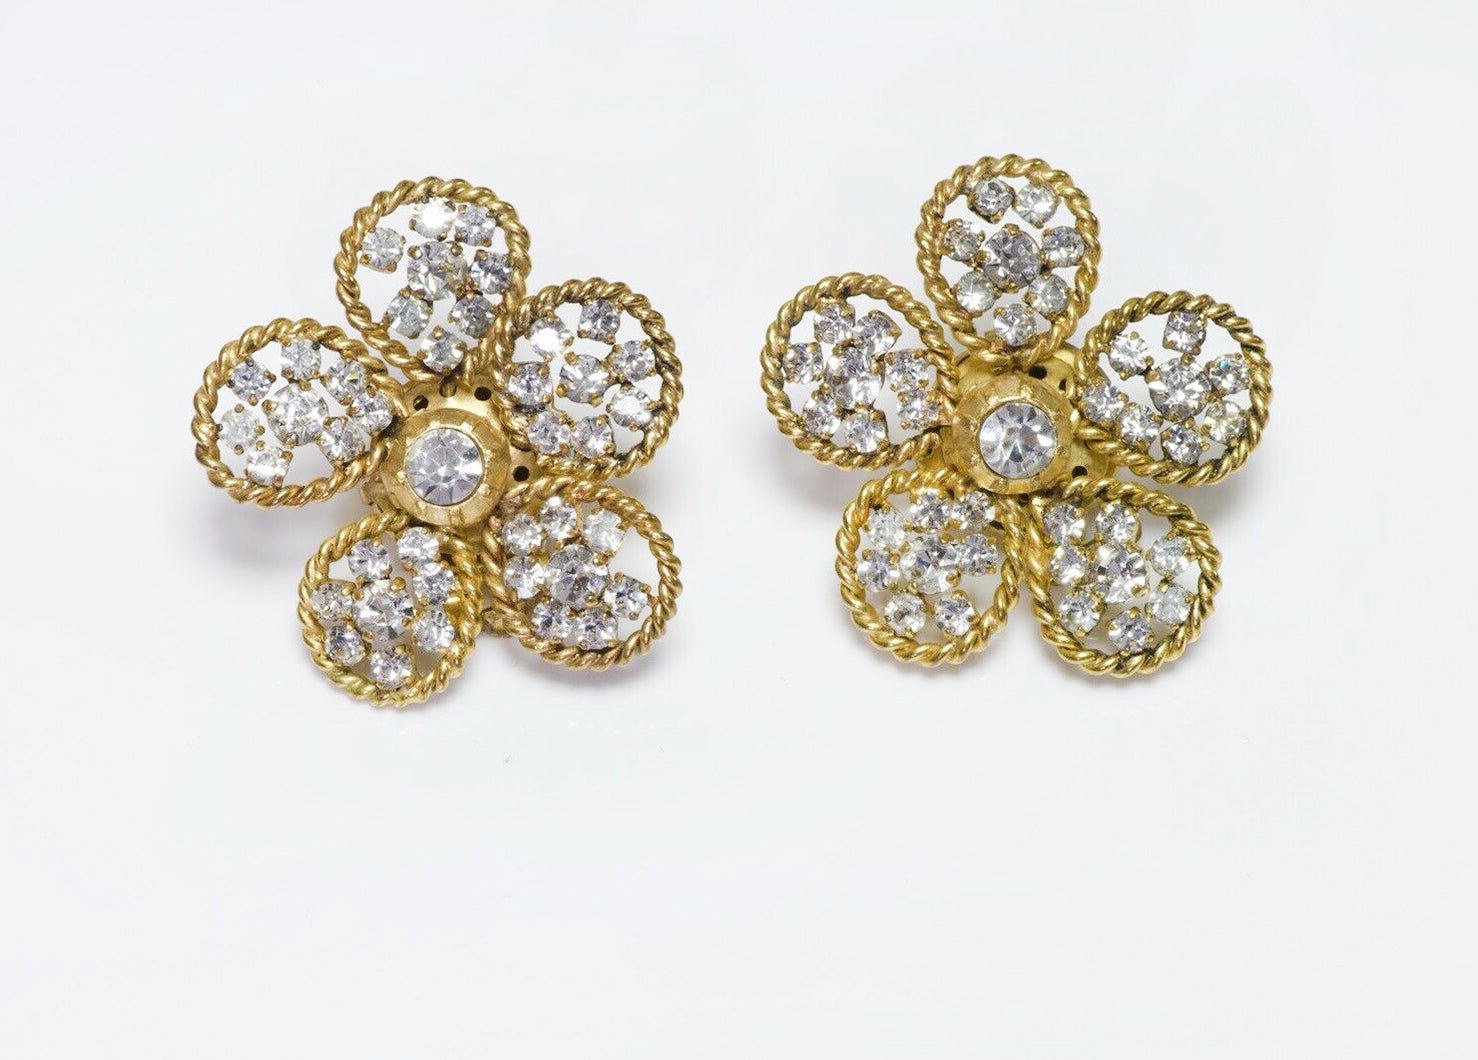 CHANEL Vintage 1983 Crystal Camellia Flower Earrings - DSF Antique Jewelry